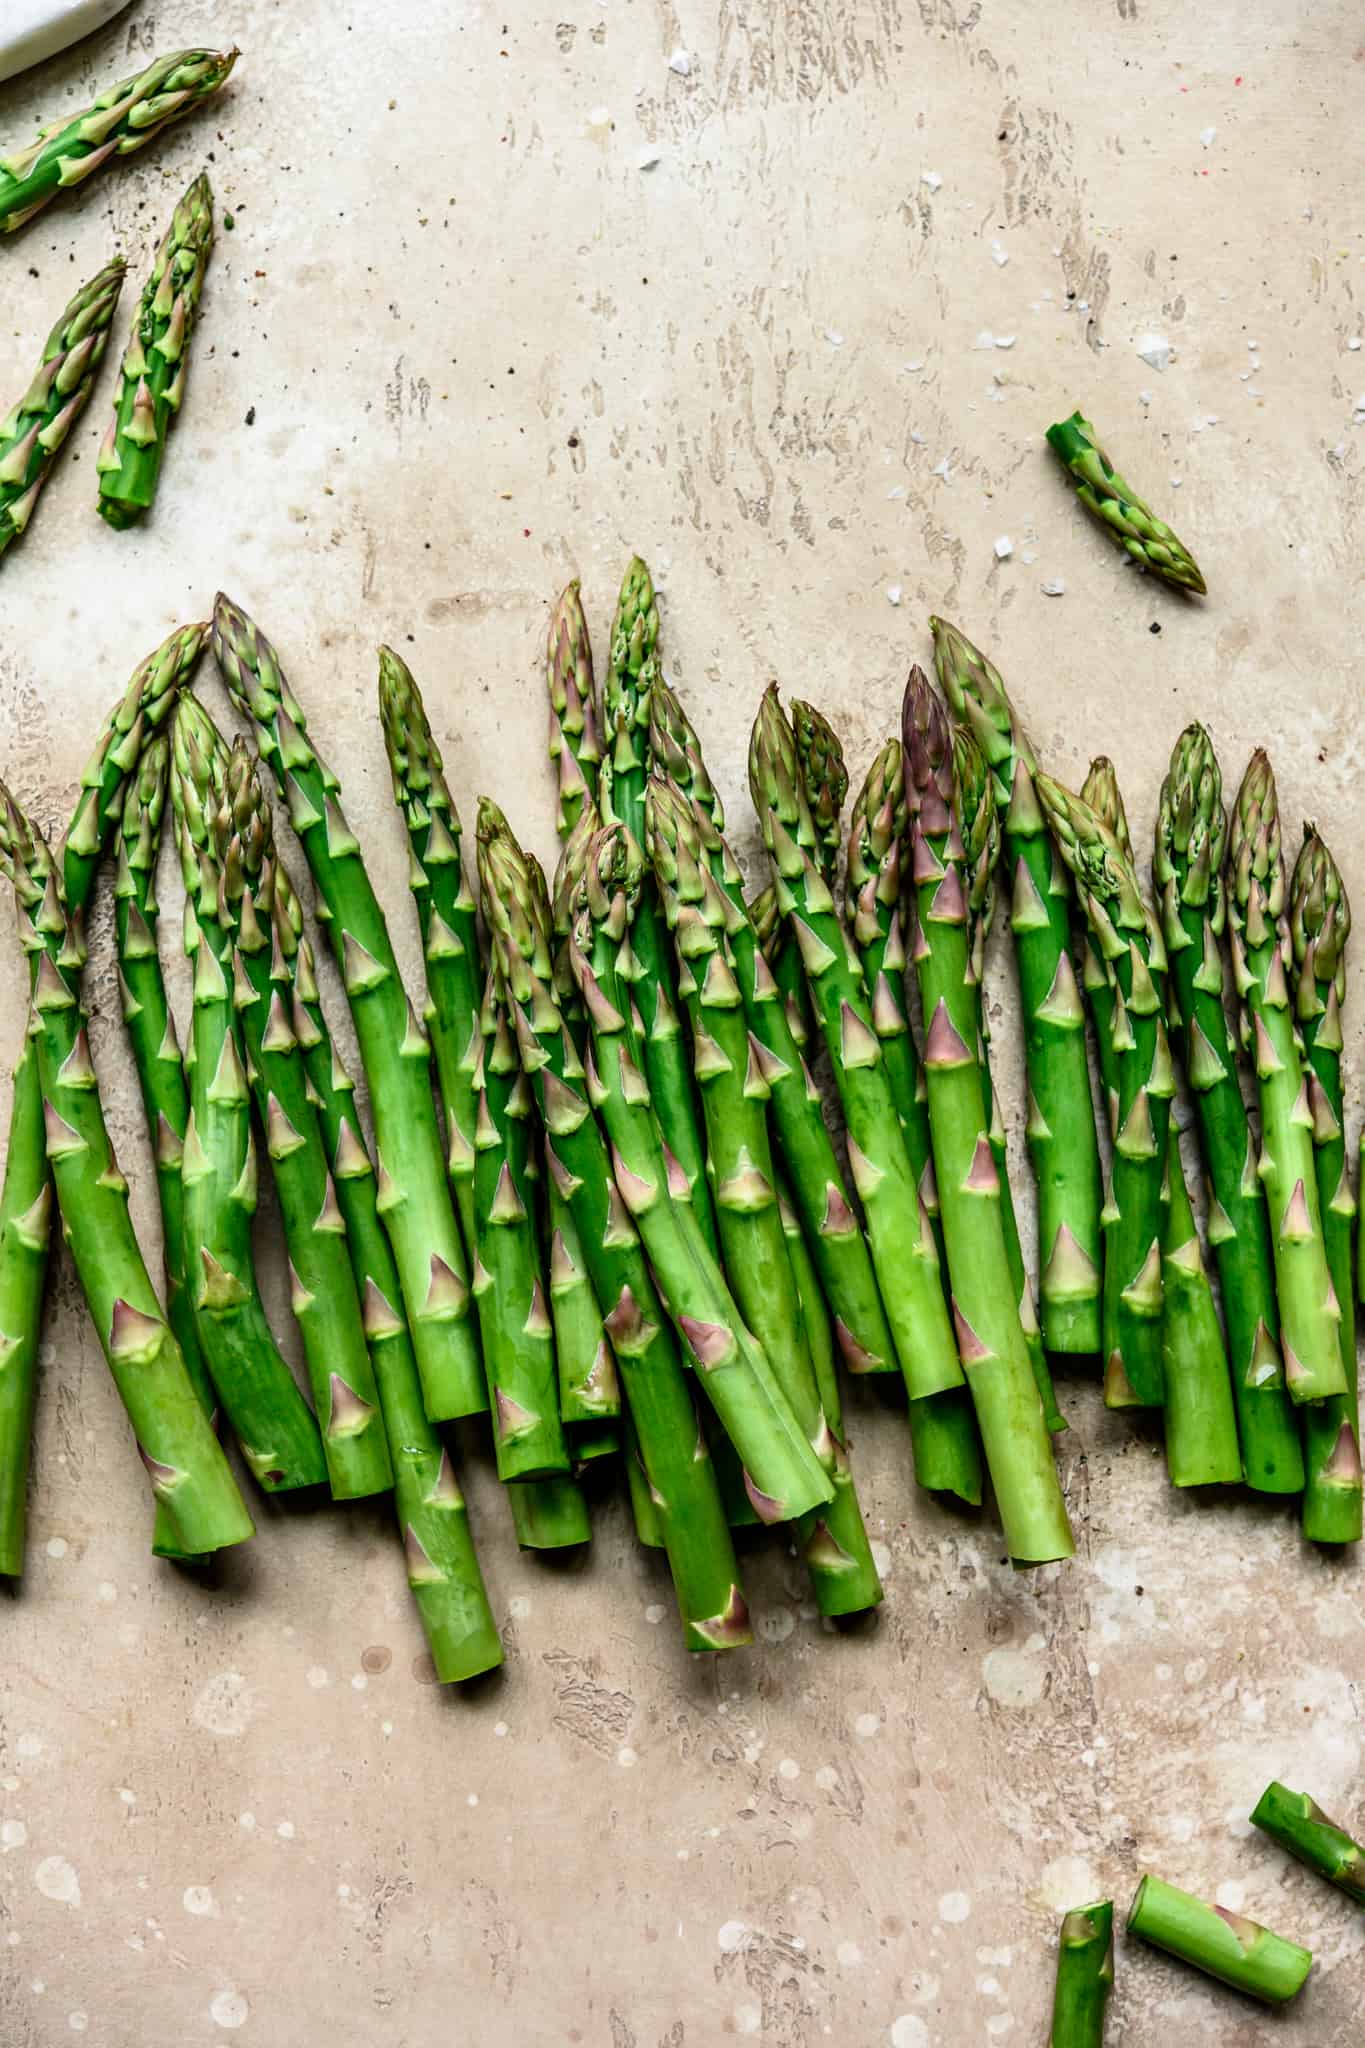 Overhead view of beautiful food photography of asparagus spears on a light tan background